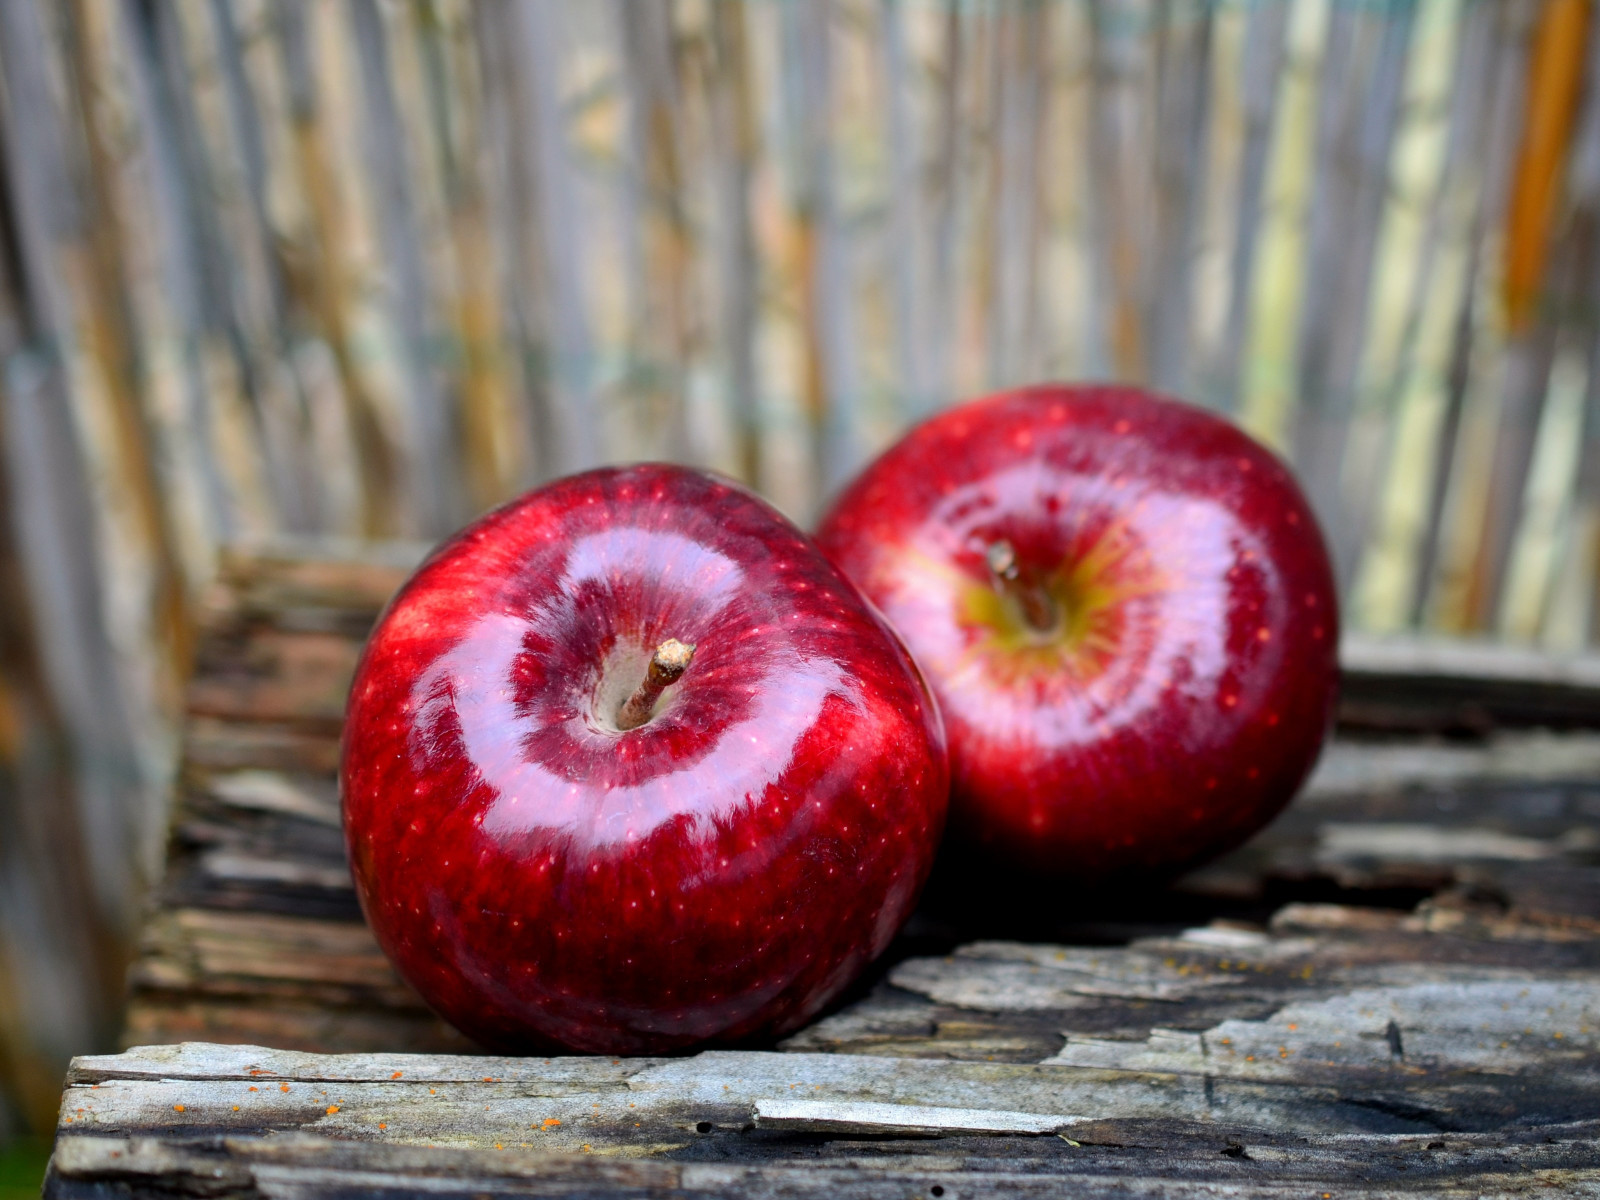 Delicious red apples wallpaper 1600x1200